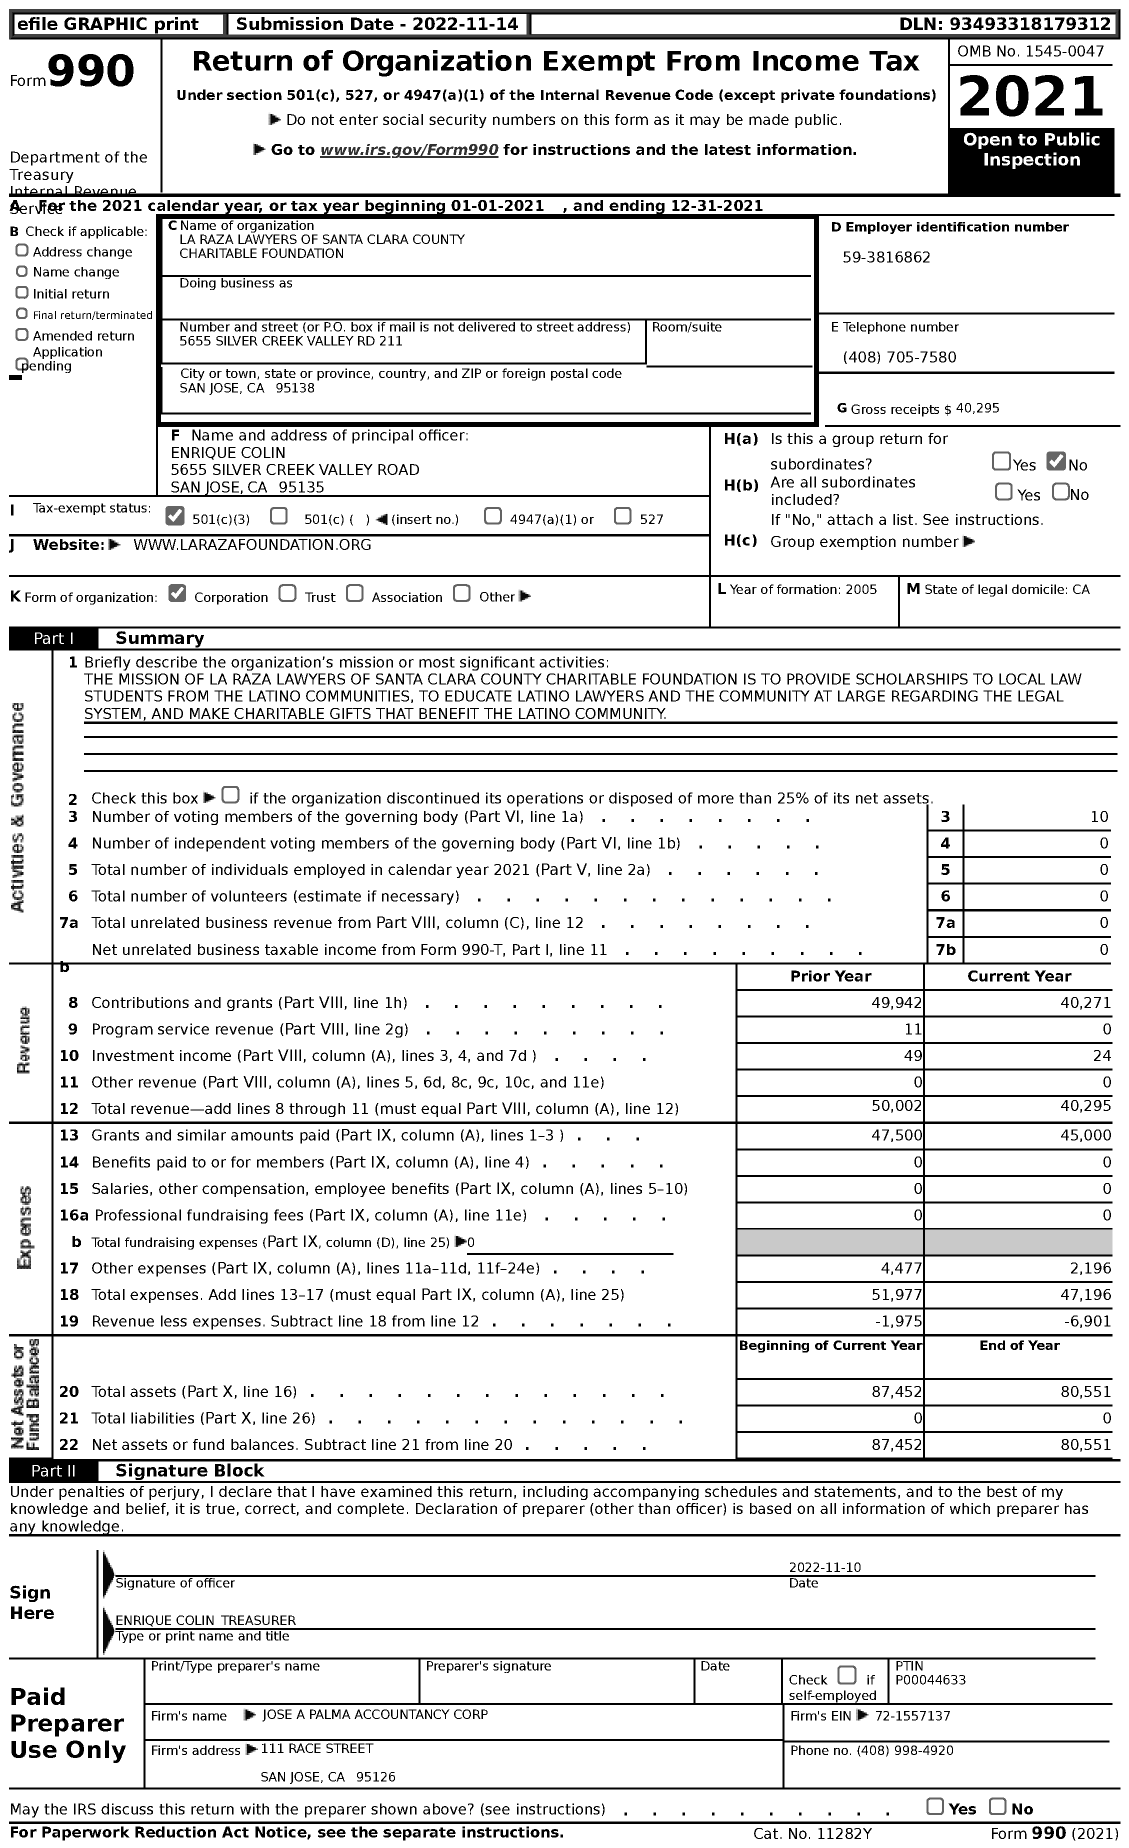 Image of first page of 2021 Form 990 for La Raza Lawyers of Santa Clara County Charitable Foundation